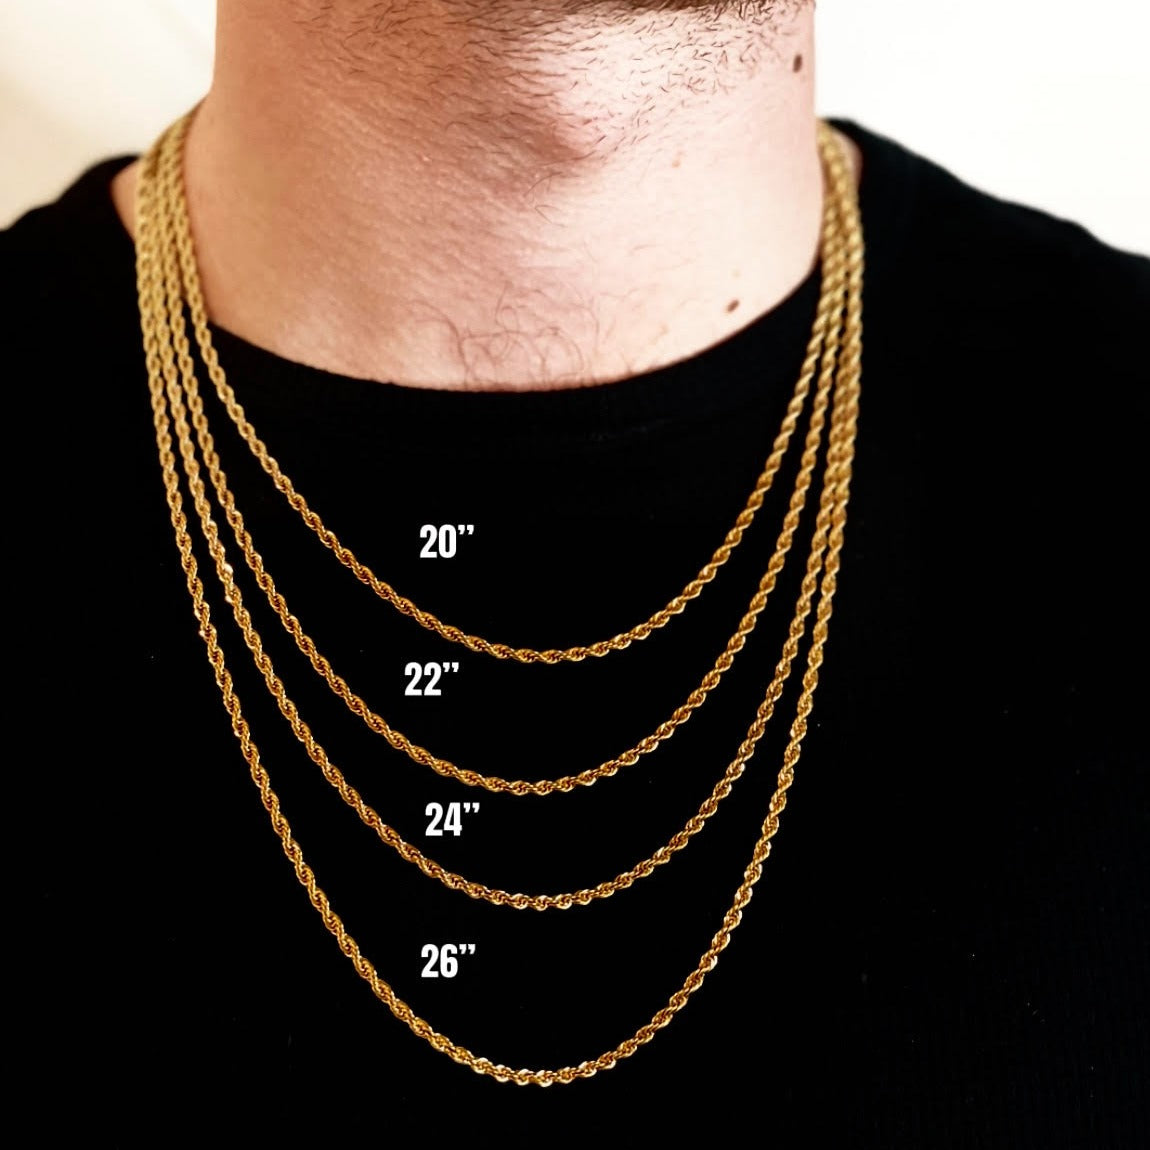 3mm Rope Chain - Gold 20”